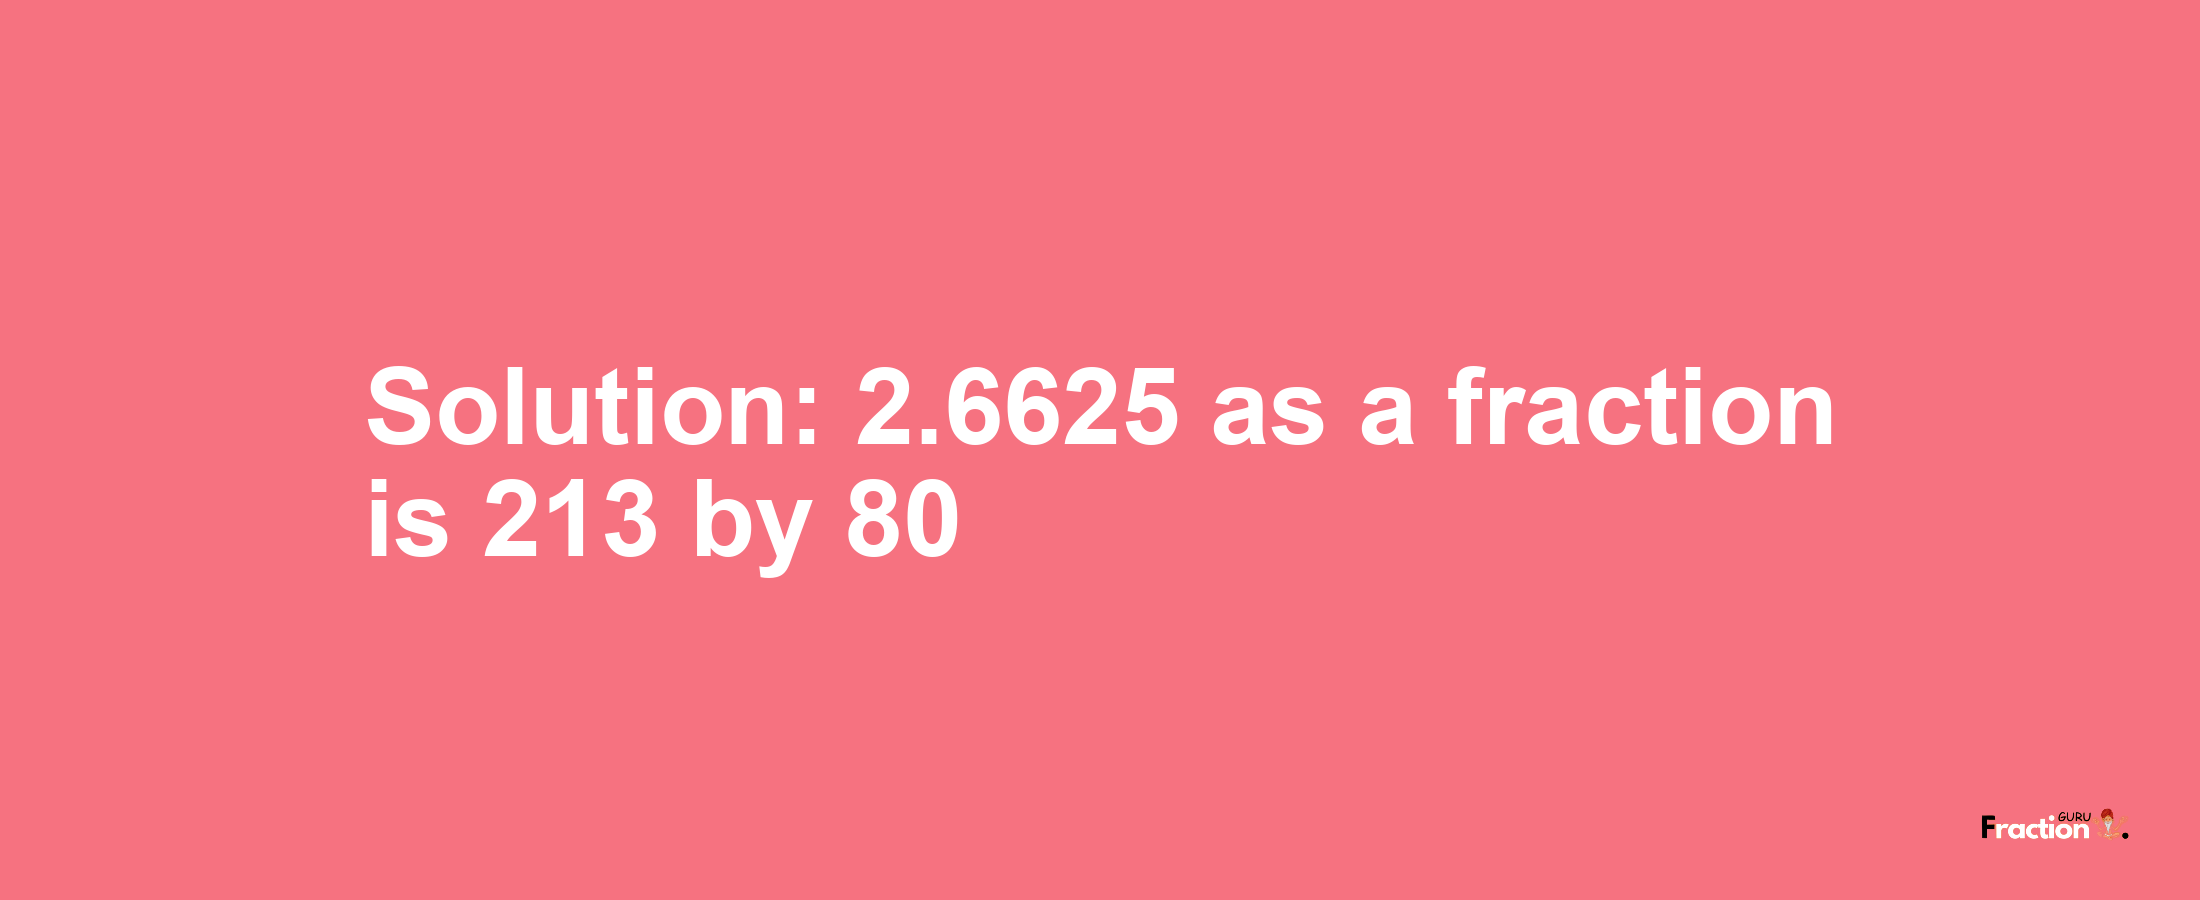 Solution:2.6625 as a fraction is 213/80